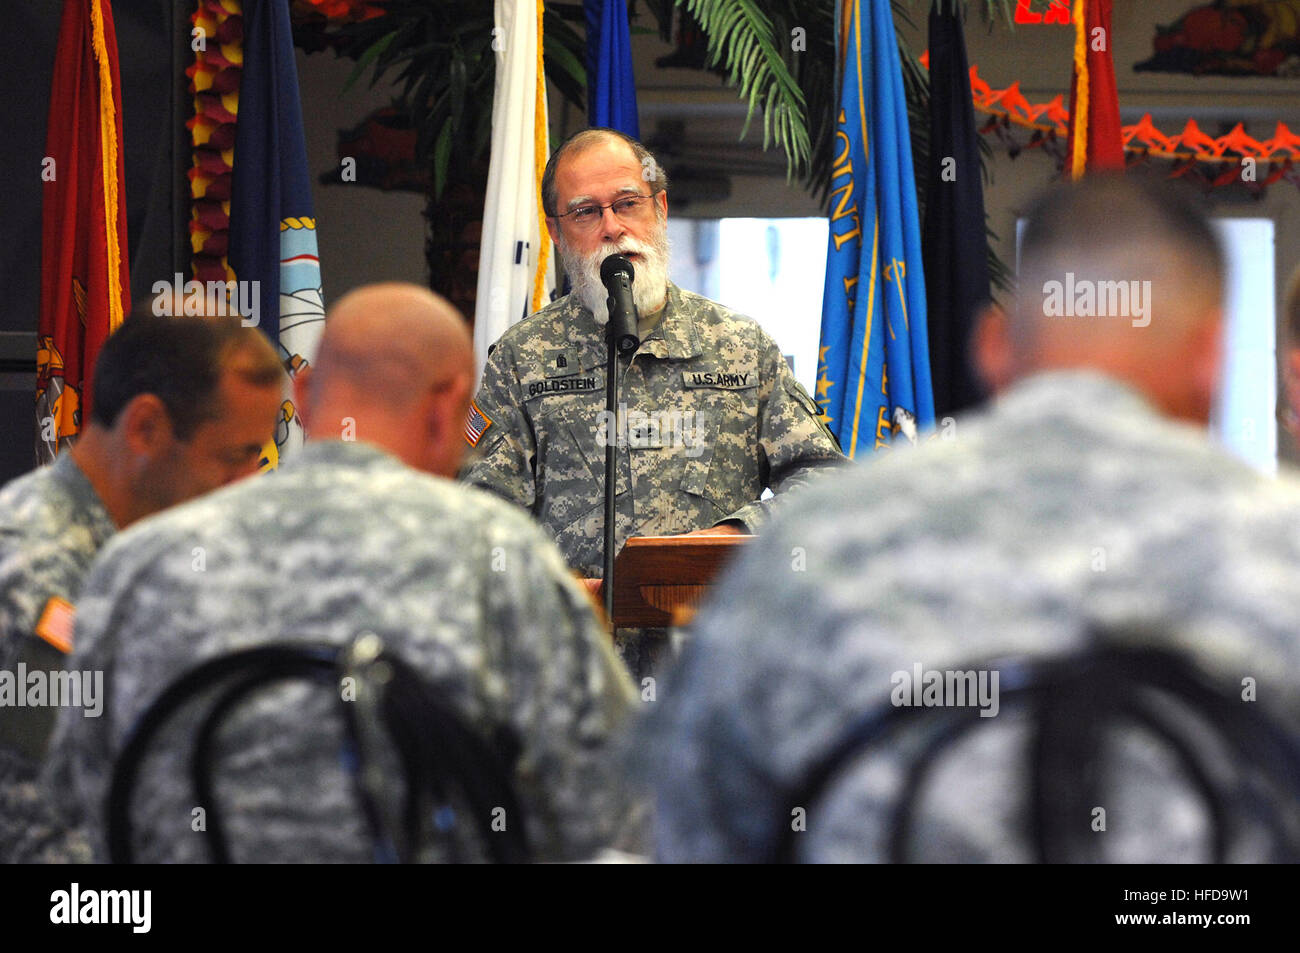 Army Col. Jacob Goldstein, a Jewish chaplain visiting Joint Task Force Guantanamo, offers blessing and guidance during a prayer breakfast at the Seaside Galley, Nov. 17, 2008. JTF Chaplains held a prayer breakfast offering faith guidance and guest speakers. JTF Guantanamo conducts safe, humane, legal and transparent care and custody of detained enemy combatants, including those convicted by military commission and those ordered released. The JTF conducts intelligence collection, analysis and dissemination for the protection of detainees and personnel working in JTF Guantanamo facilities and in Stock Photo